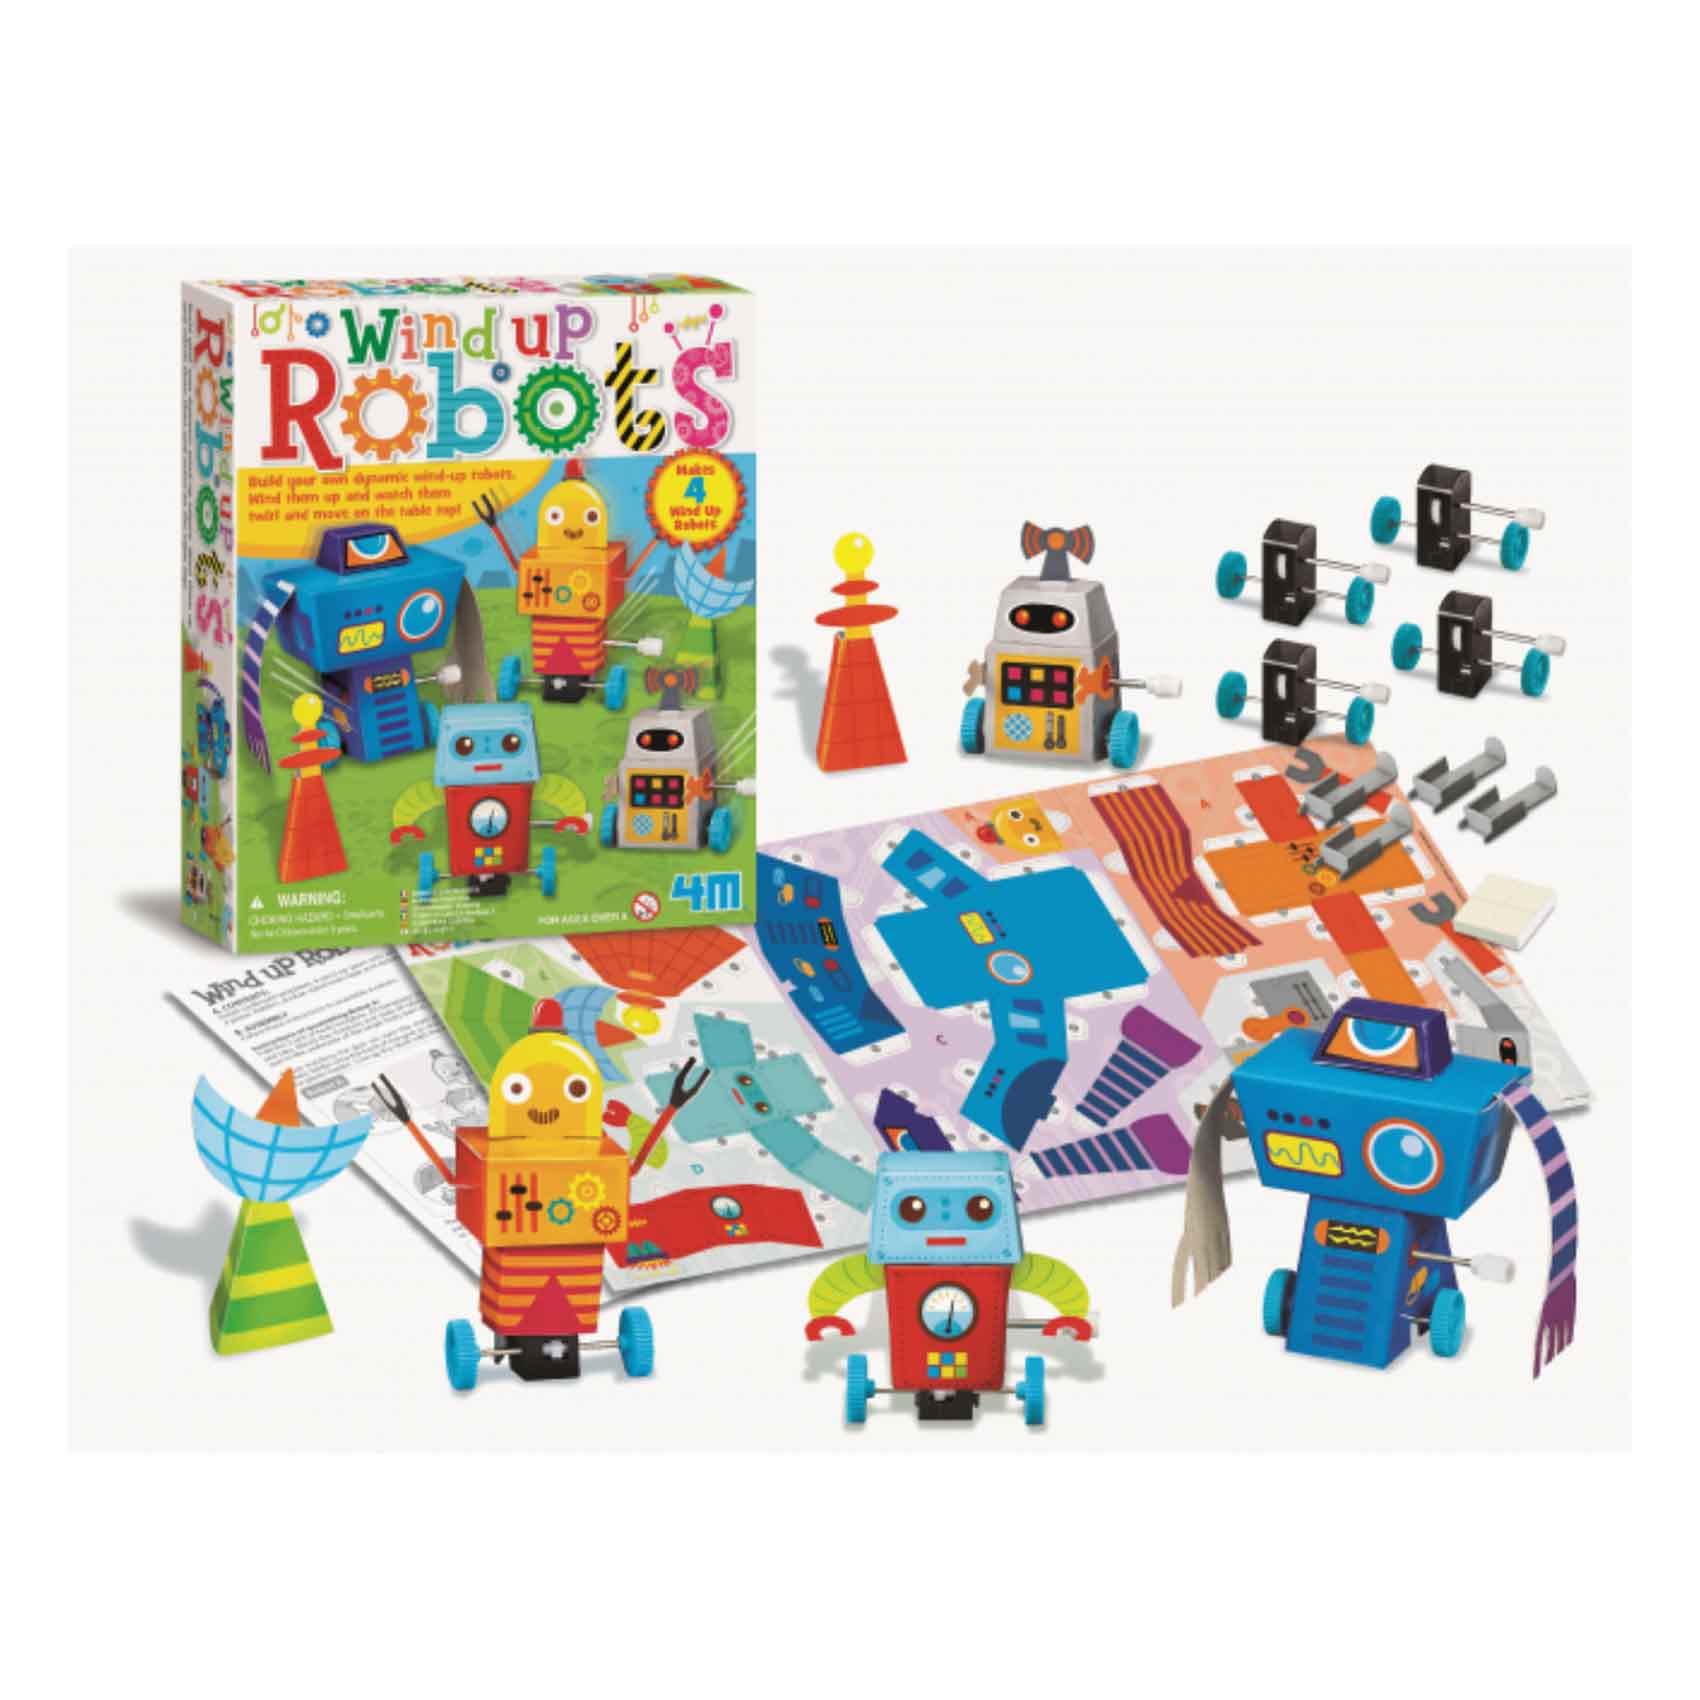 4M Wind Up Robots Maker 5+ Years